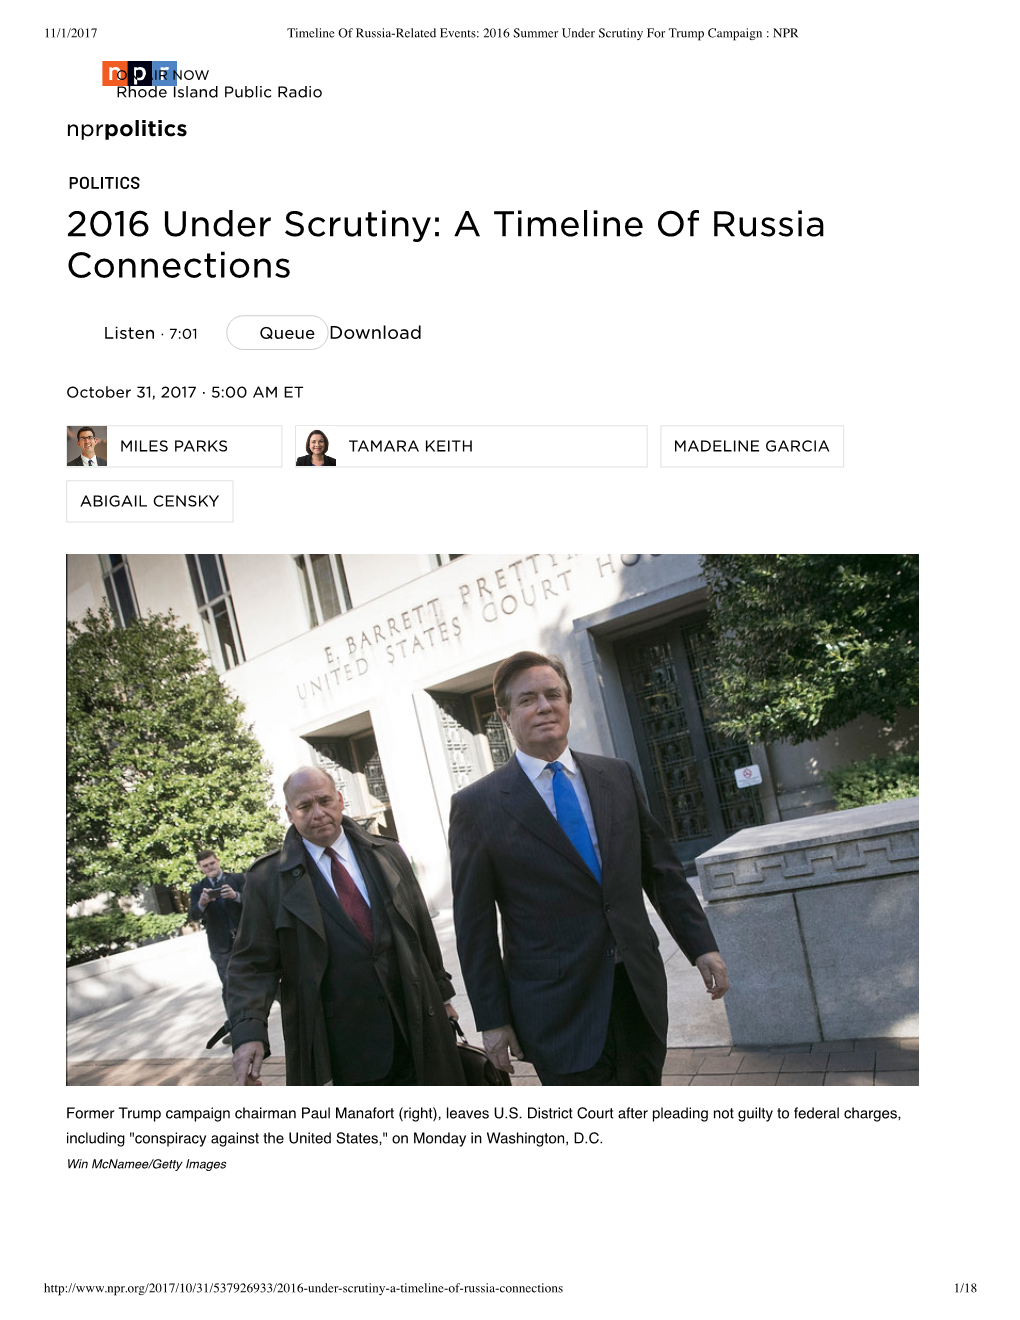 2016 Under Scrutiny: a Timeline of Russia Connections